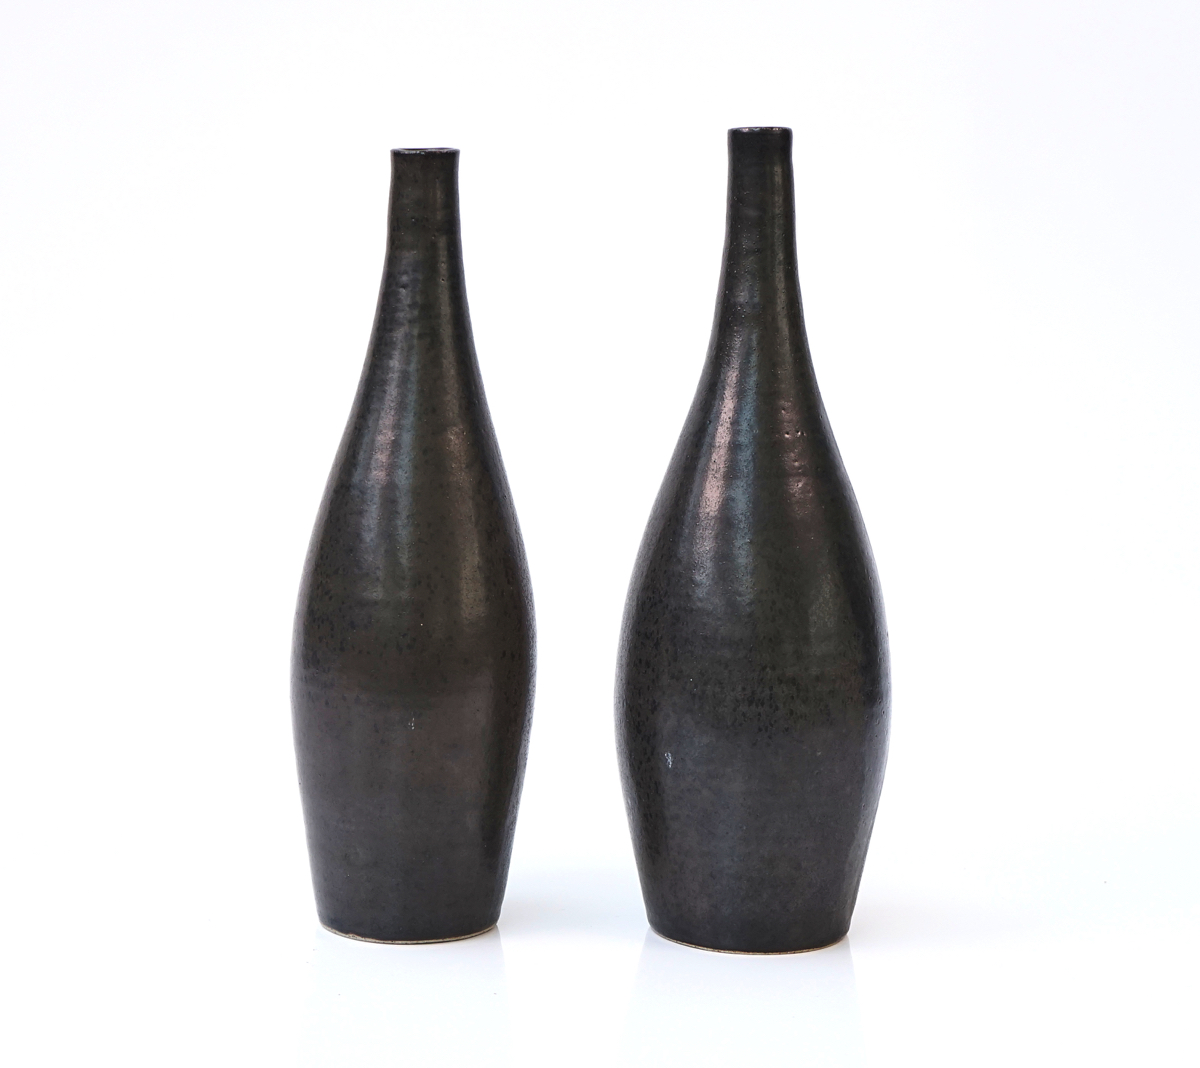 A PAIR OF CONTEMPORARY STUDIO POTTERY GLAZED STONEWARE BOTTLE VASES - Image 2 of 4